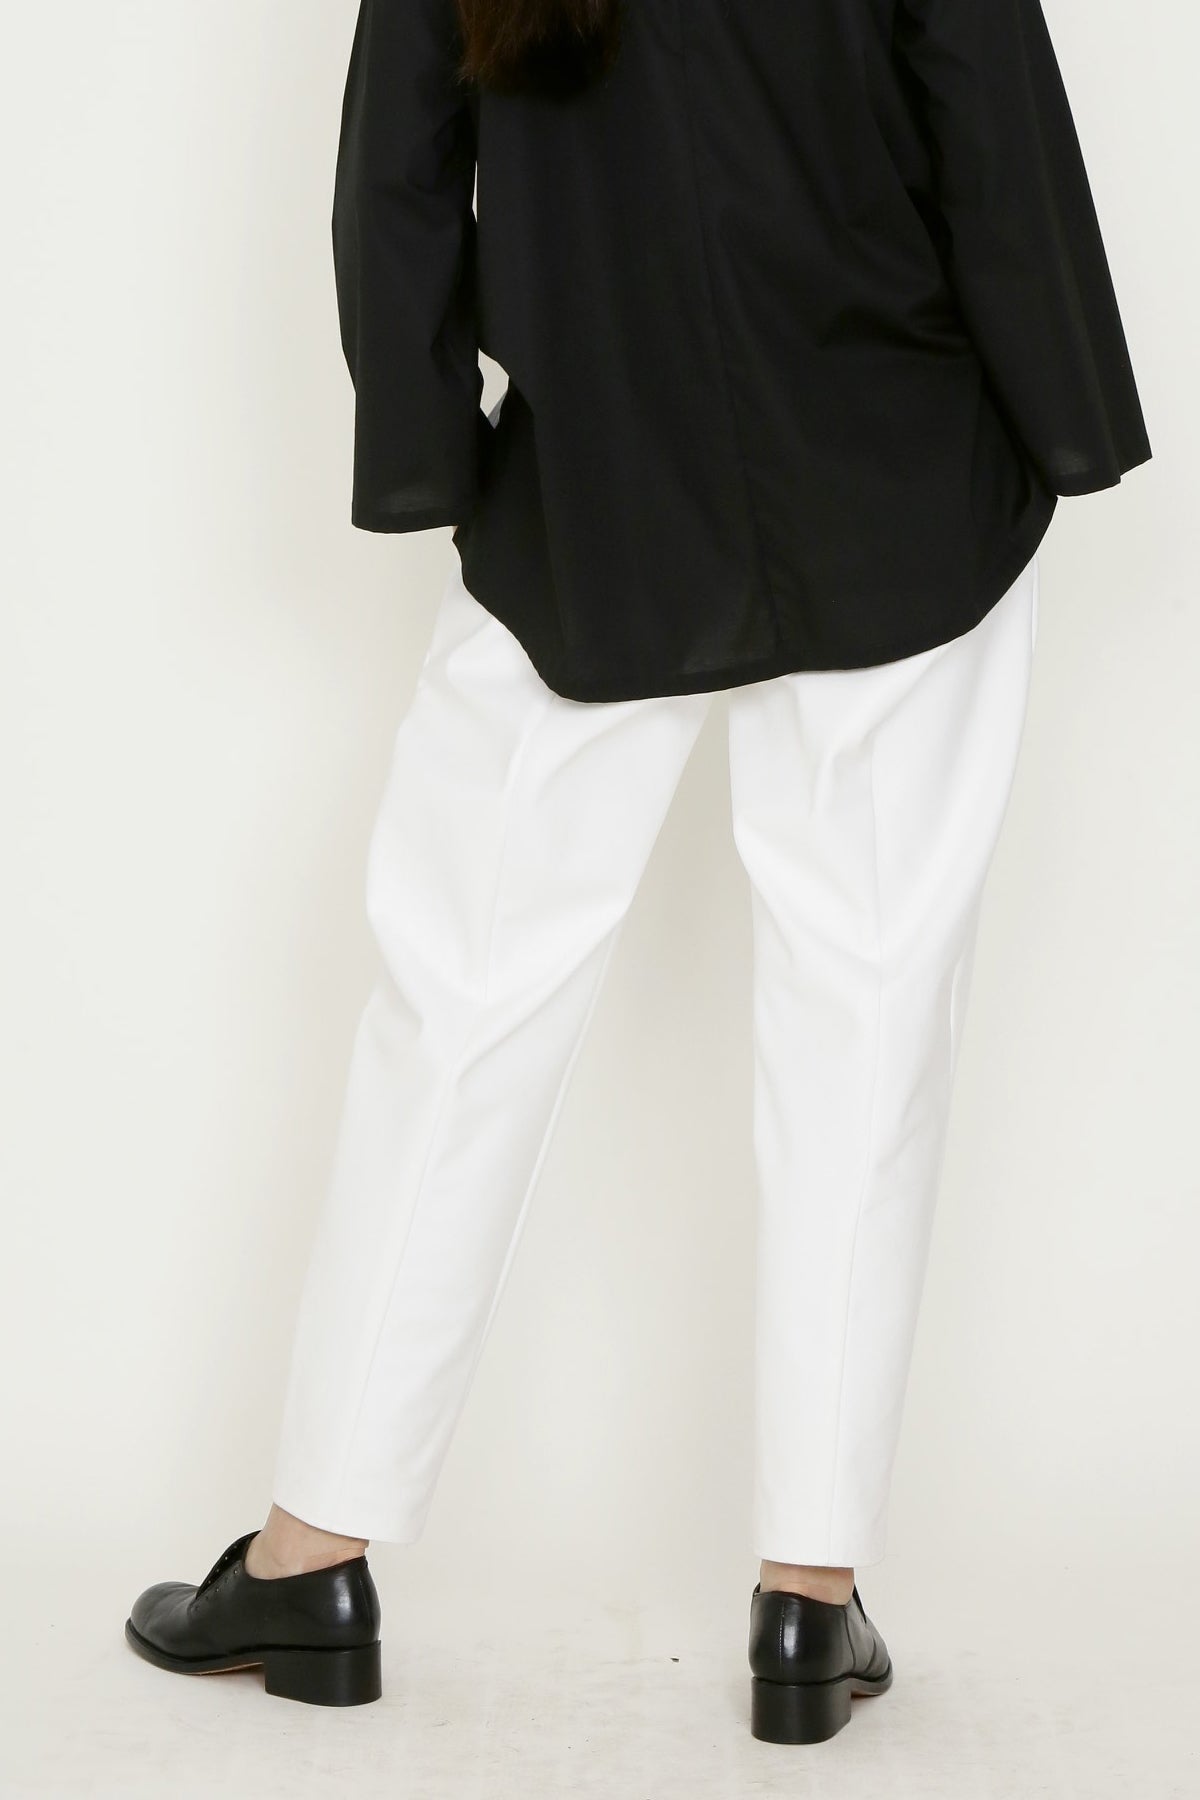 White Denim Fly-Front Crescent Pant with Pockets